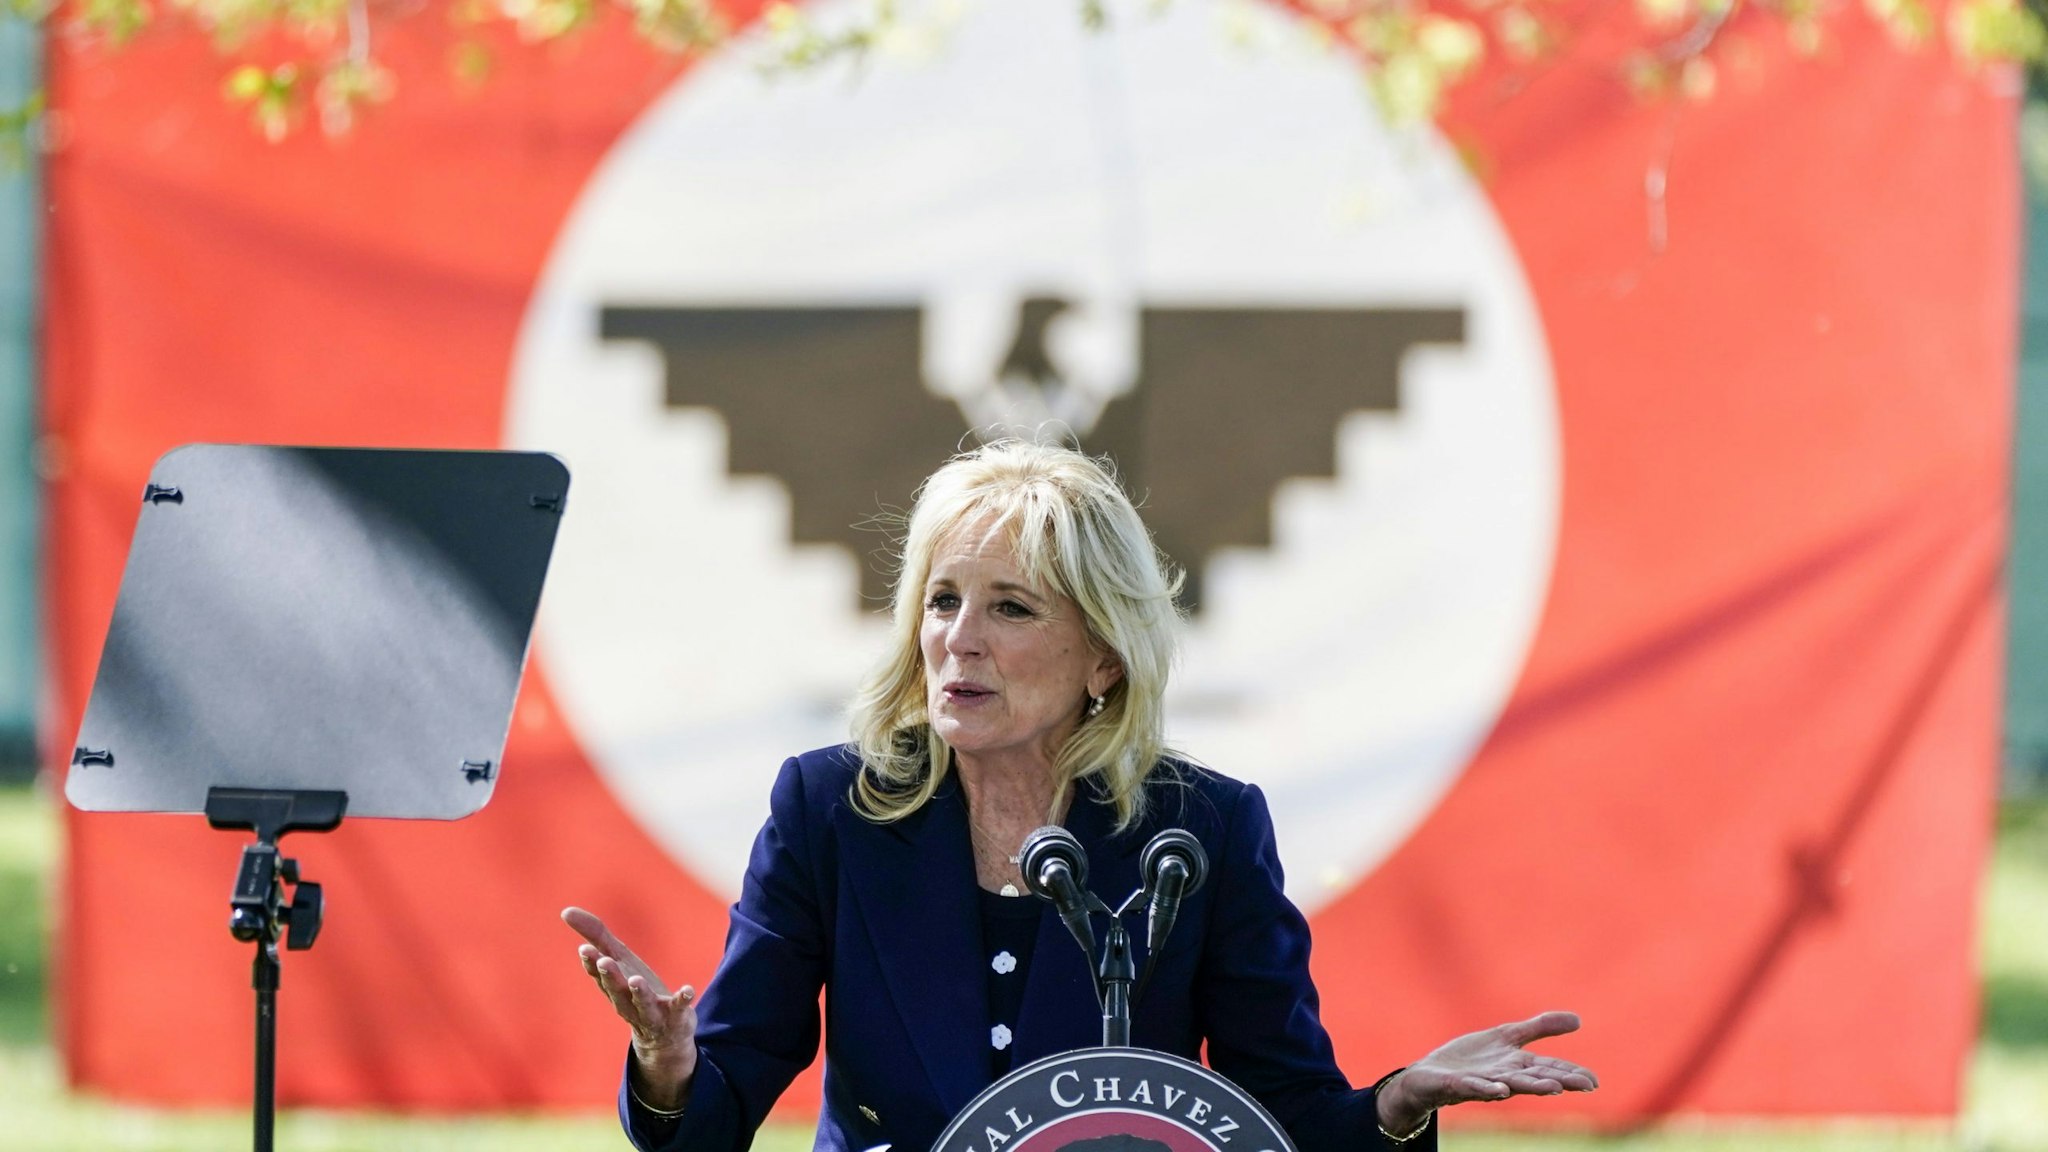 DELANO, CA - MARCH 31: First Lady Dr. Jill Biden participates in a Day of Action at The Forty Acres with the Cesar Chavez Foundation, United Farm Workers, and the UFW Foundation on Wednesday, March 31, 2021 in Delano, CA.